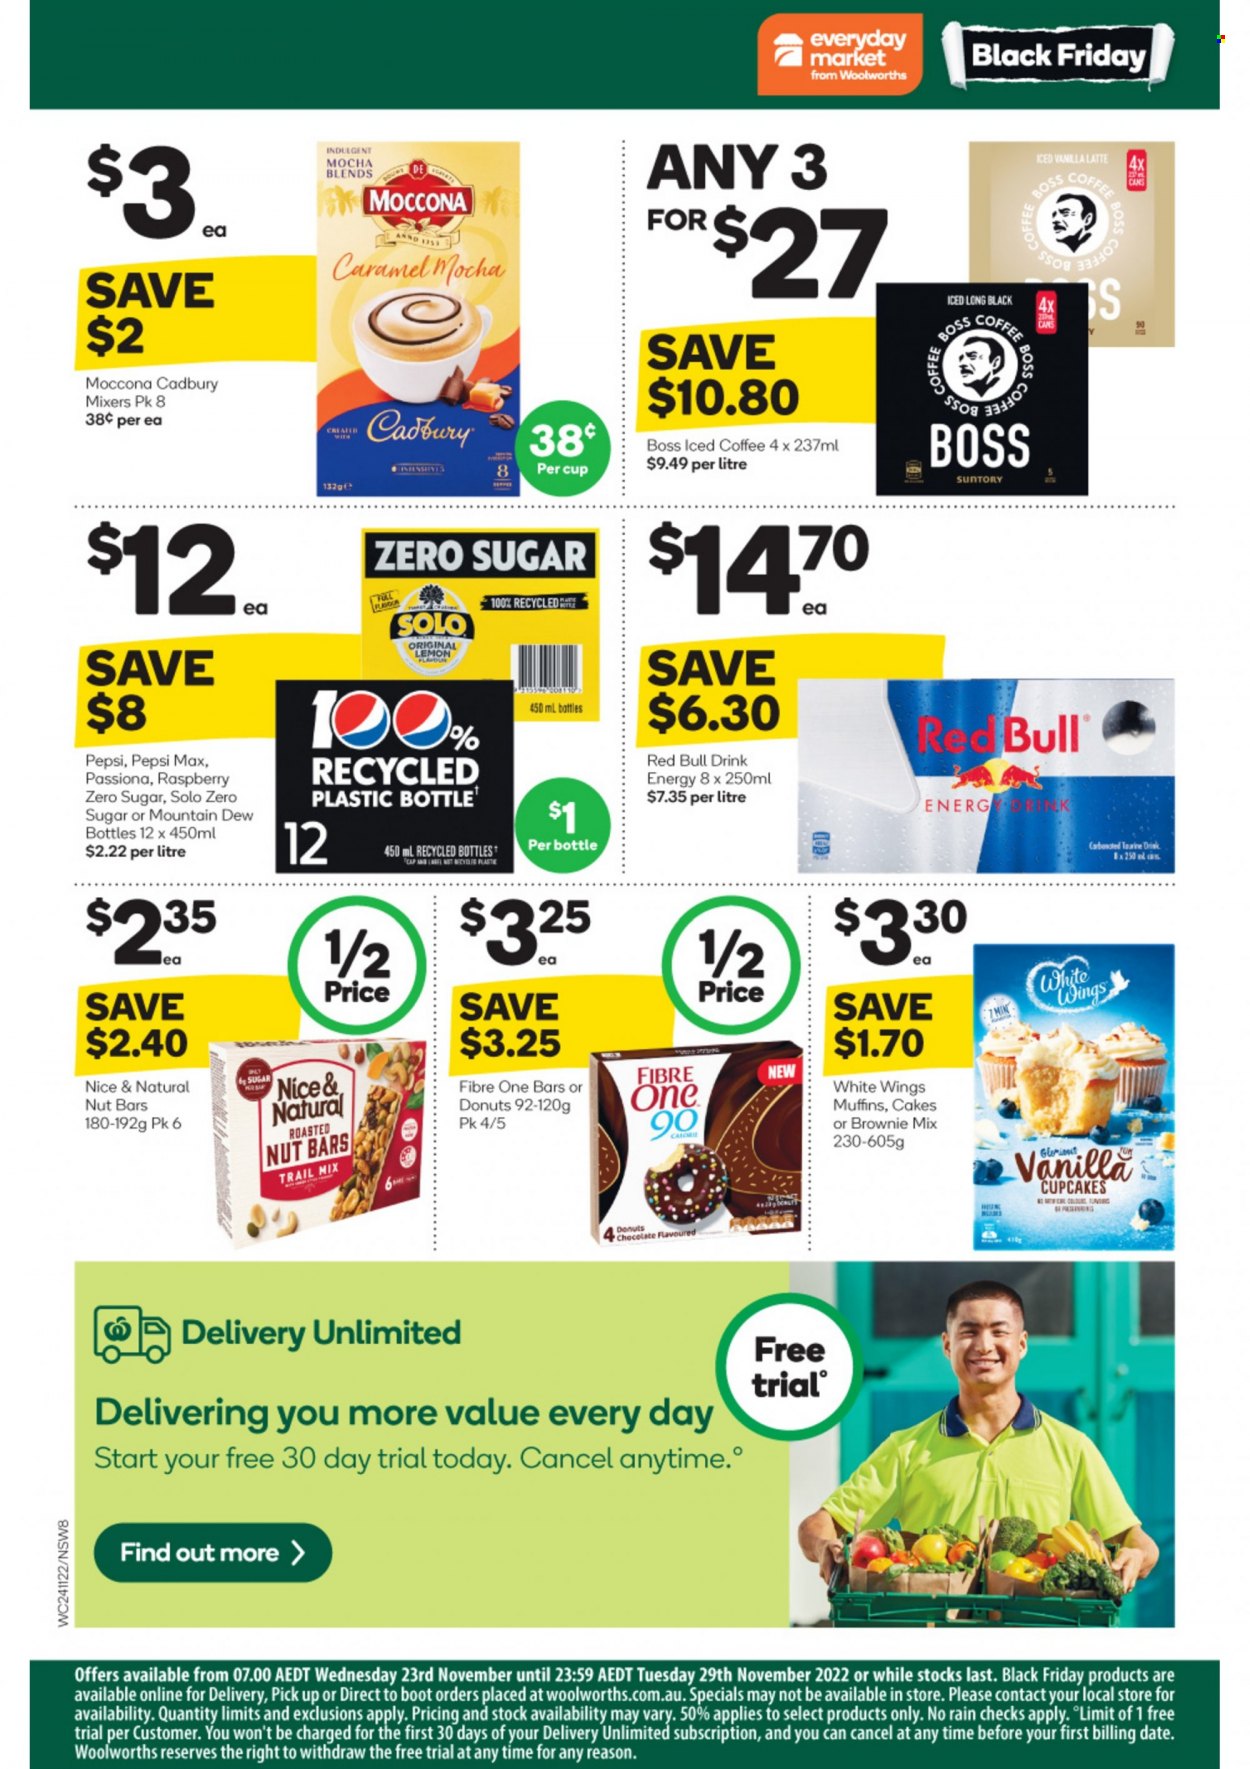 thumbnail - Woolworths Catalogue - 23 Nov 2022 - 29 Nov 2022 - Sales products - cake, cupcake, donut, muffin, brownie mix, White Wings, Cadbury, nut bar, caramel, trail mix, Mountain Dew, Pepsi, Pepsi Max, Red Bull, iced coffee, Moccona, plate, cup, cap. Page 8.